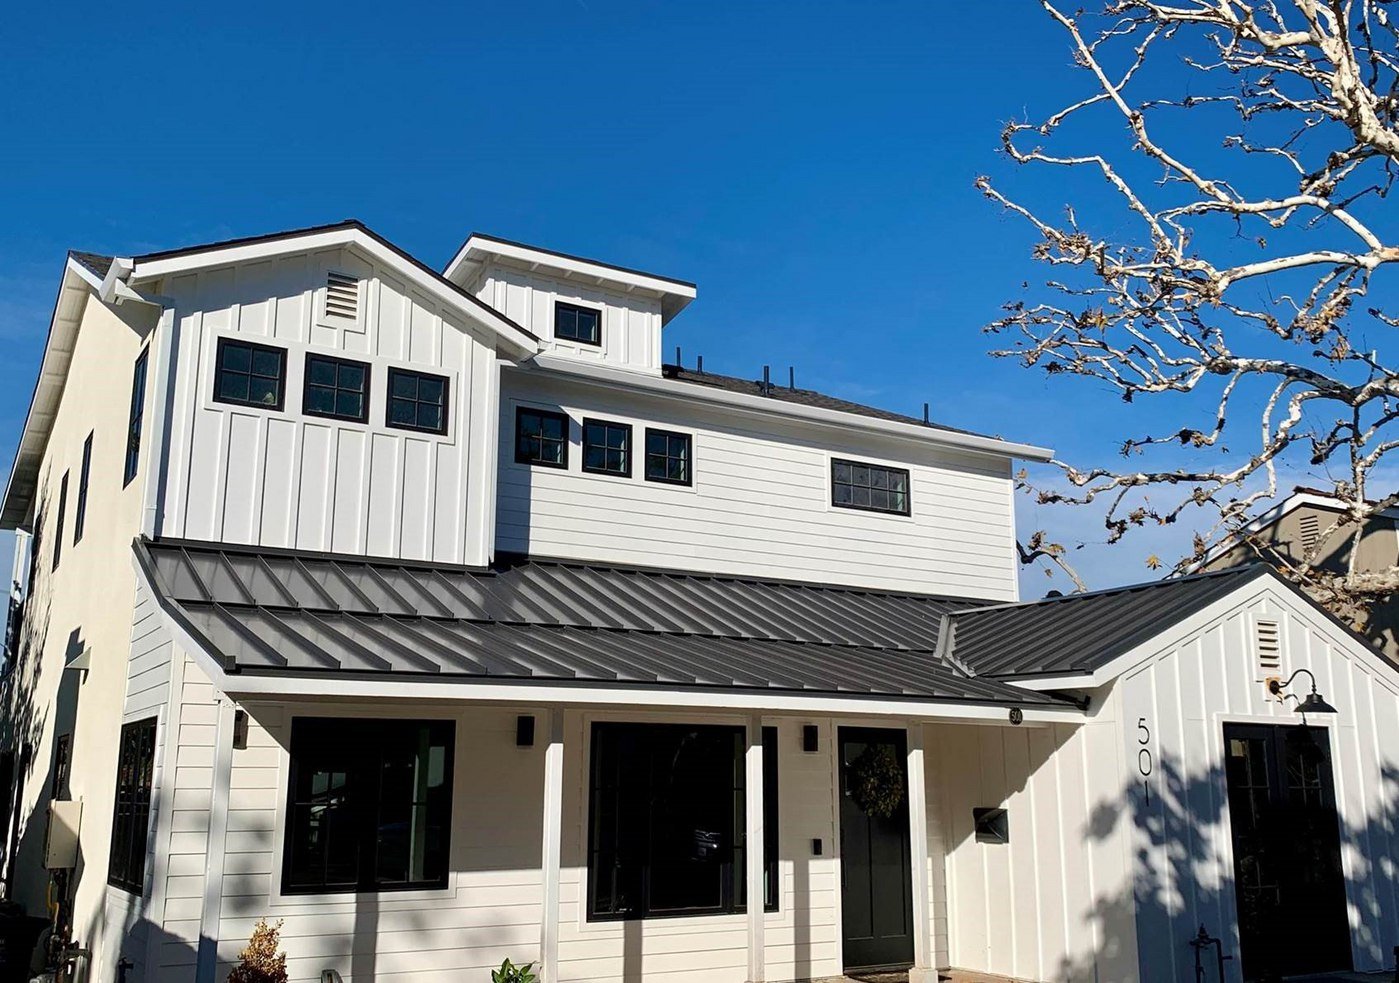 Metal Roofing Pros And Cons: Is A Metal Roof Right For You?